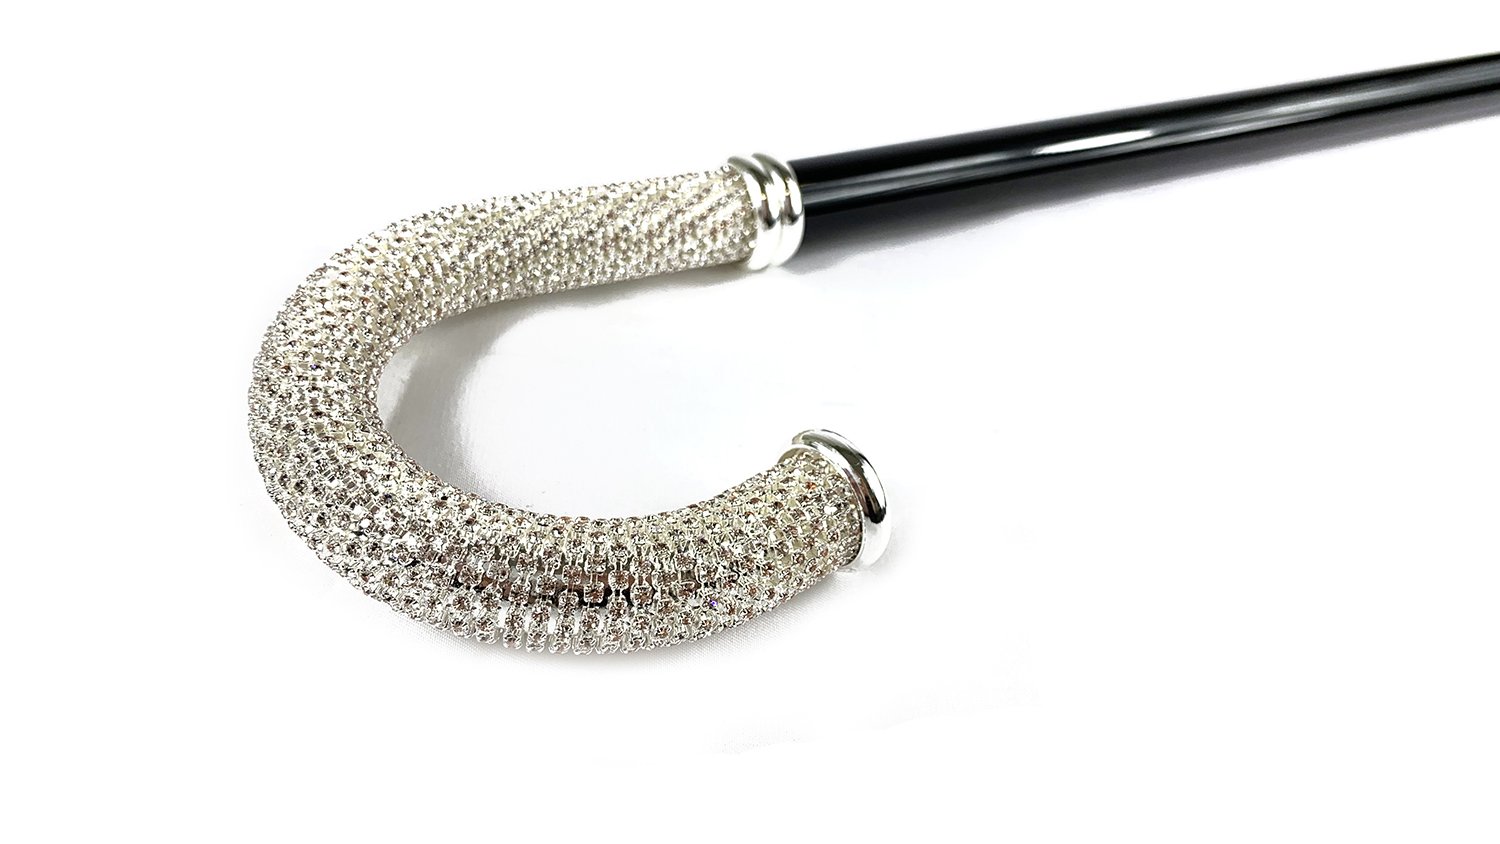 Luxury Walking stick for Man with thousands of white crystals - IL MARCHESATO LUXURY UMBRELLAS, CANES AND SHOEHORNS